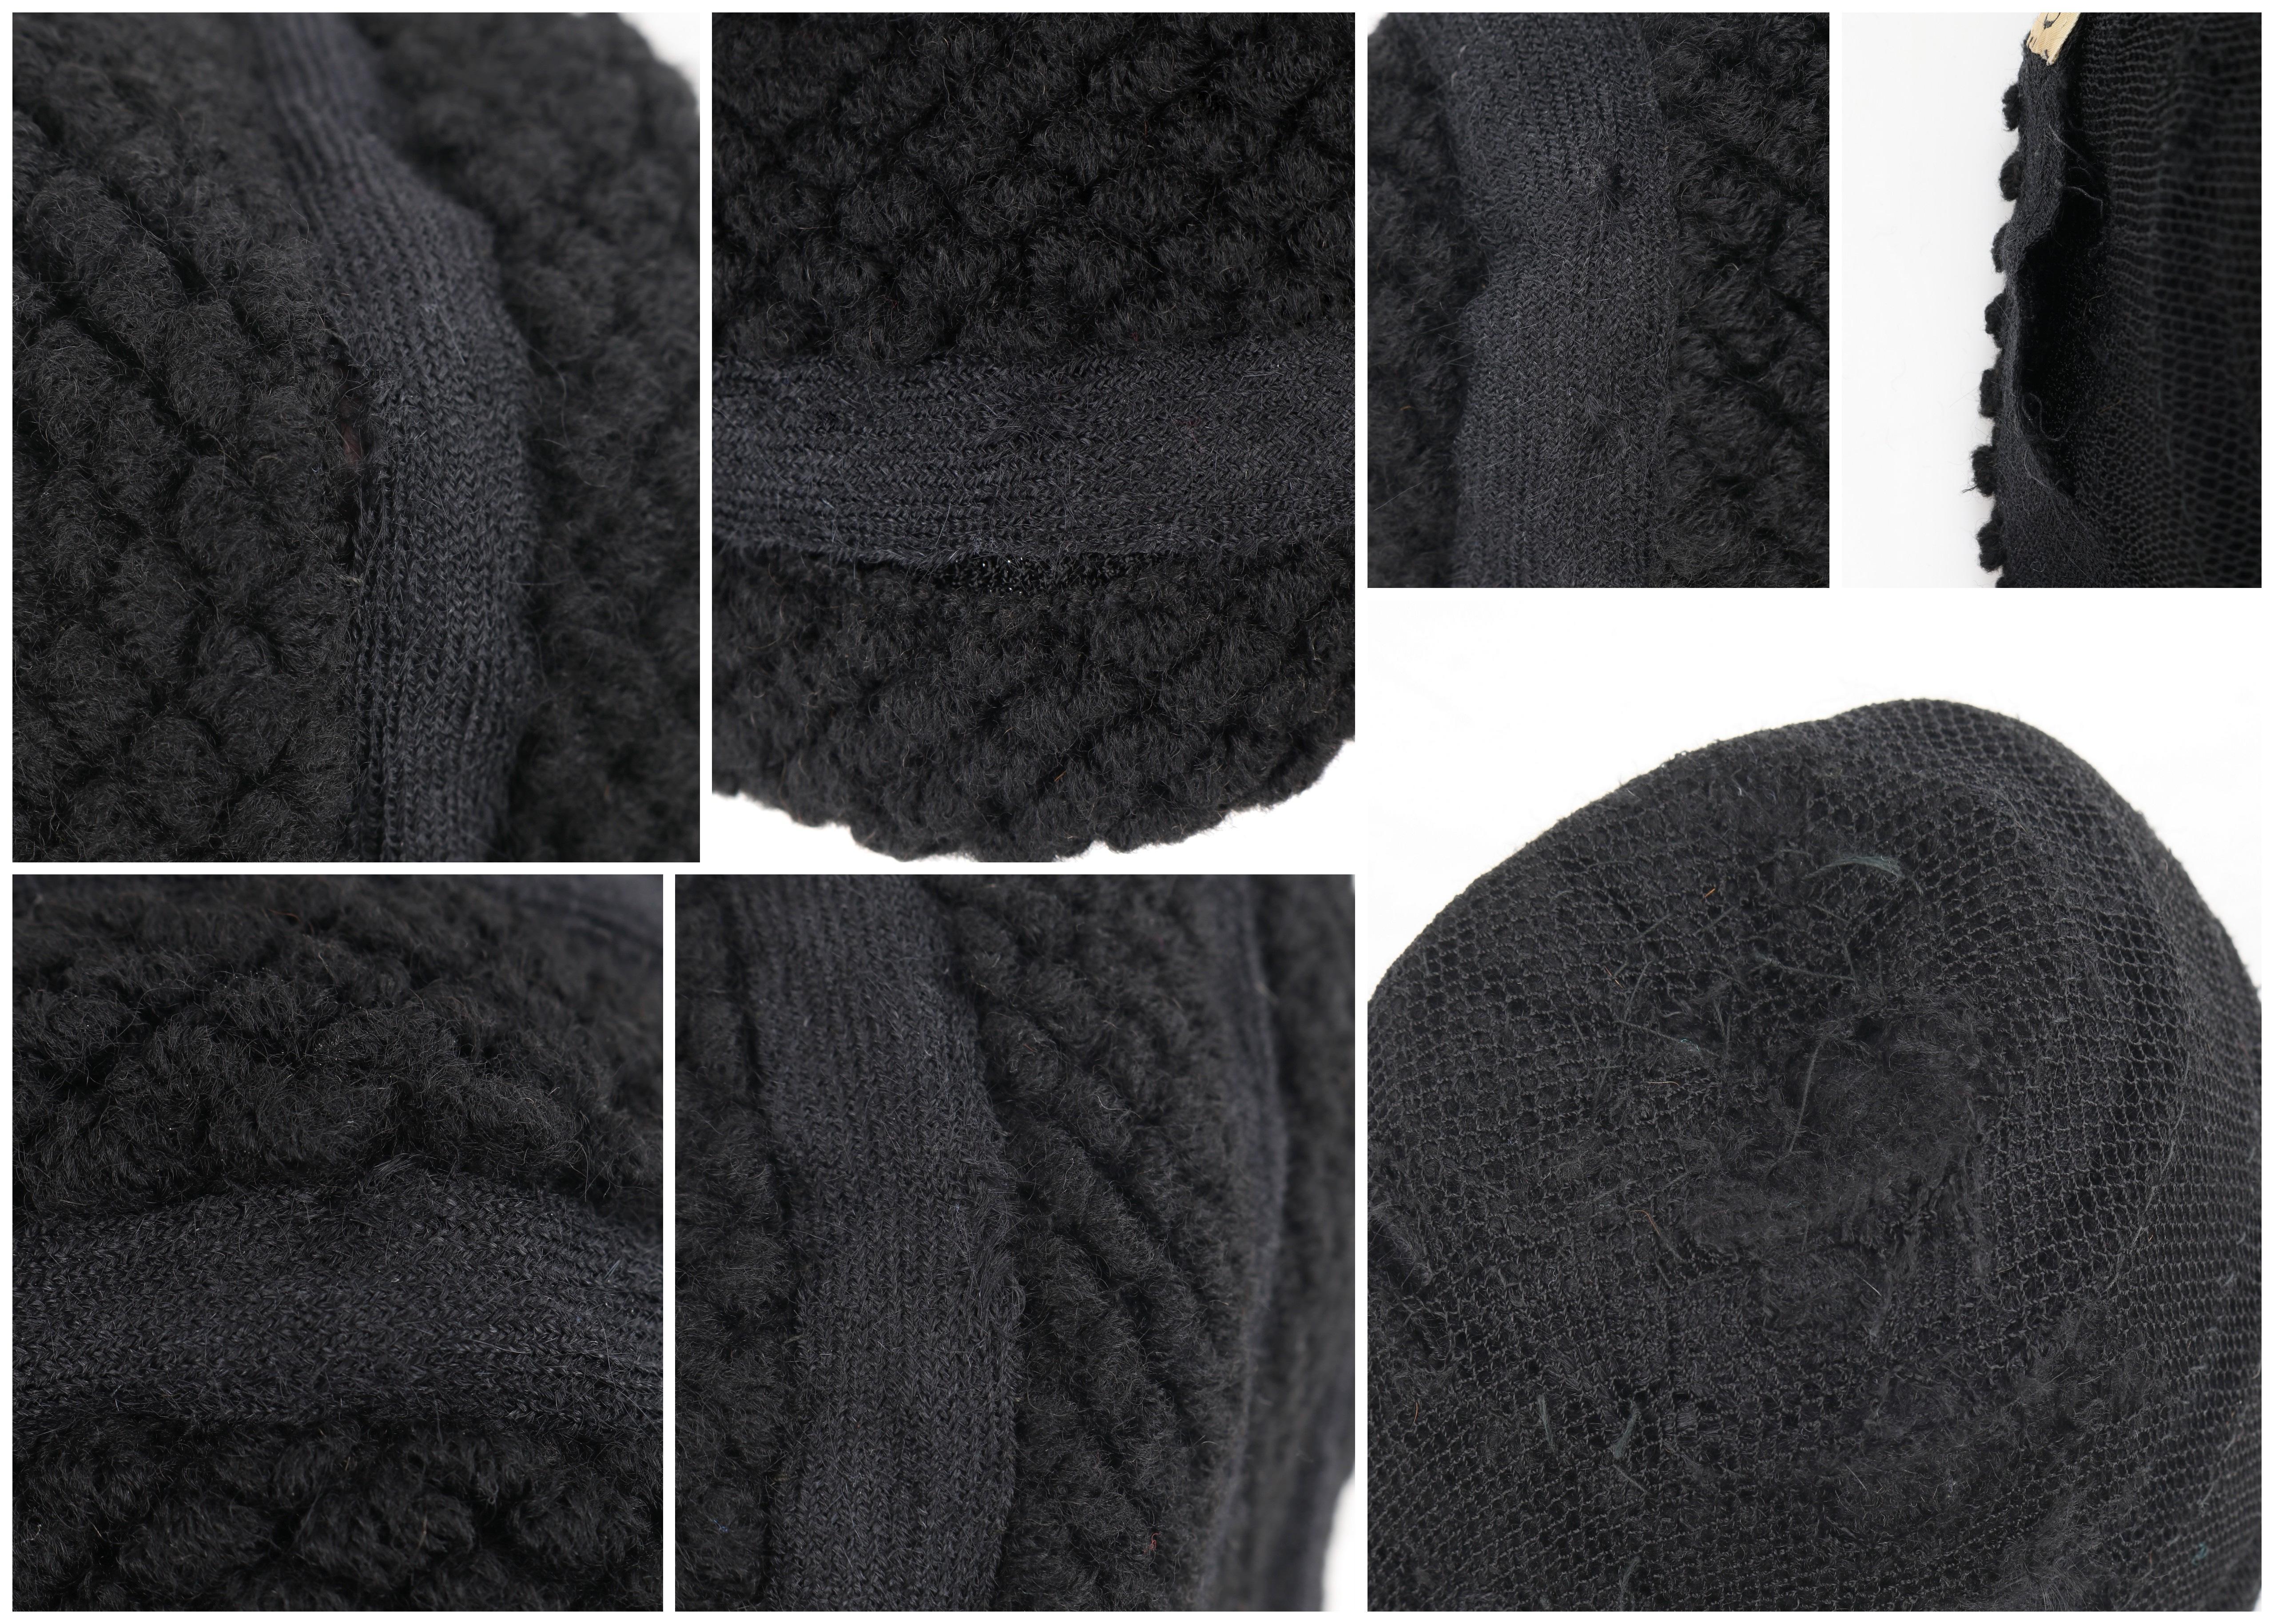 CHRISTIAN DIOR Early c.1960’s Couture Black Crochet Knit Layered Cap Hat  5